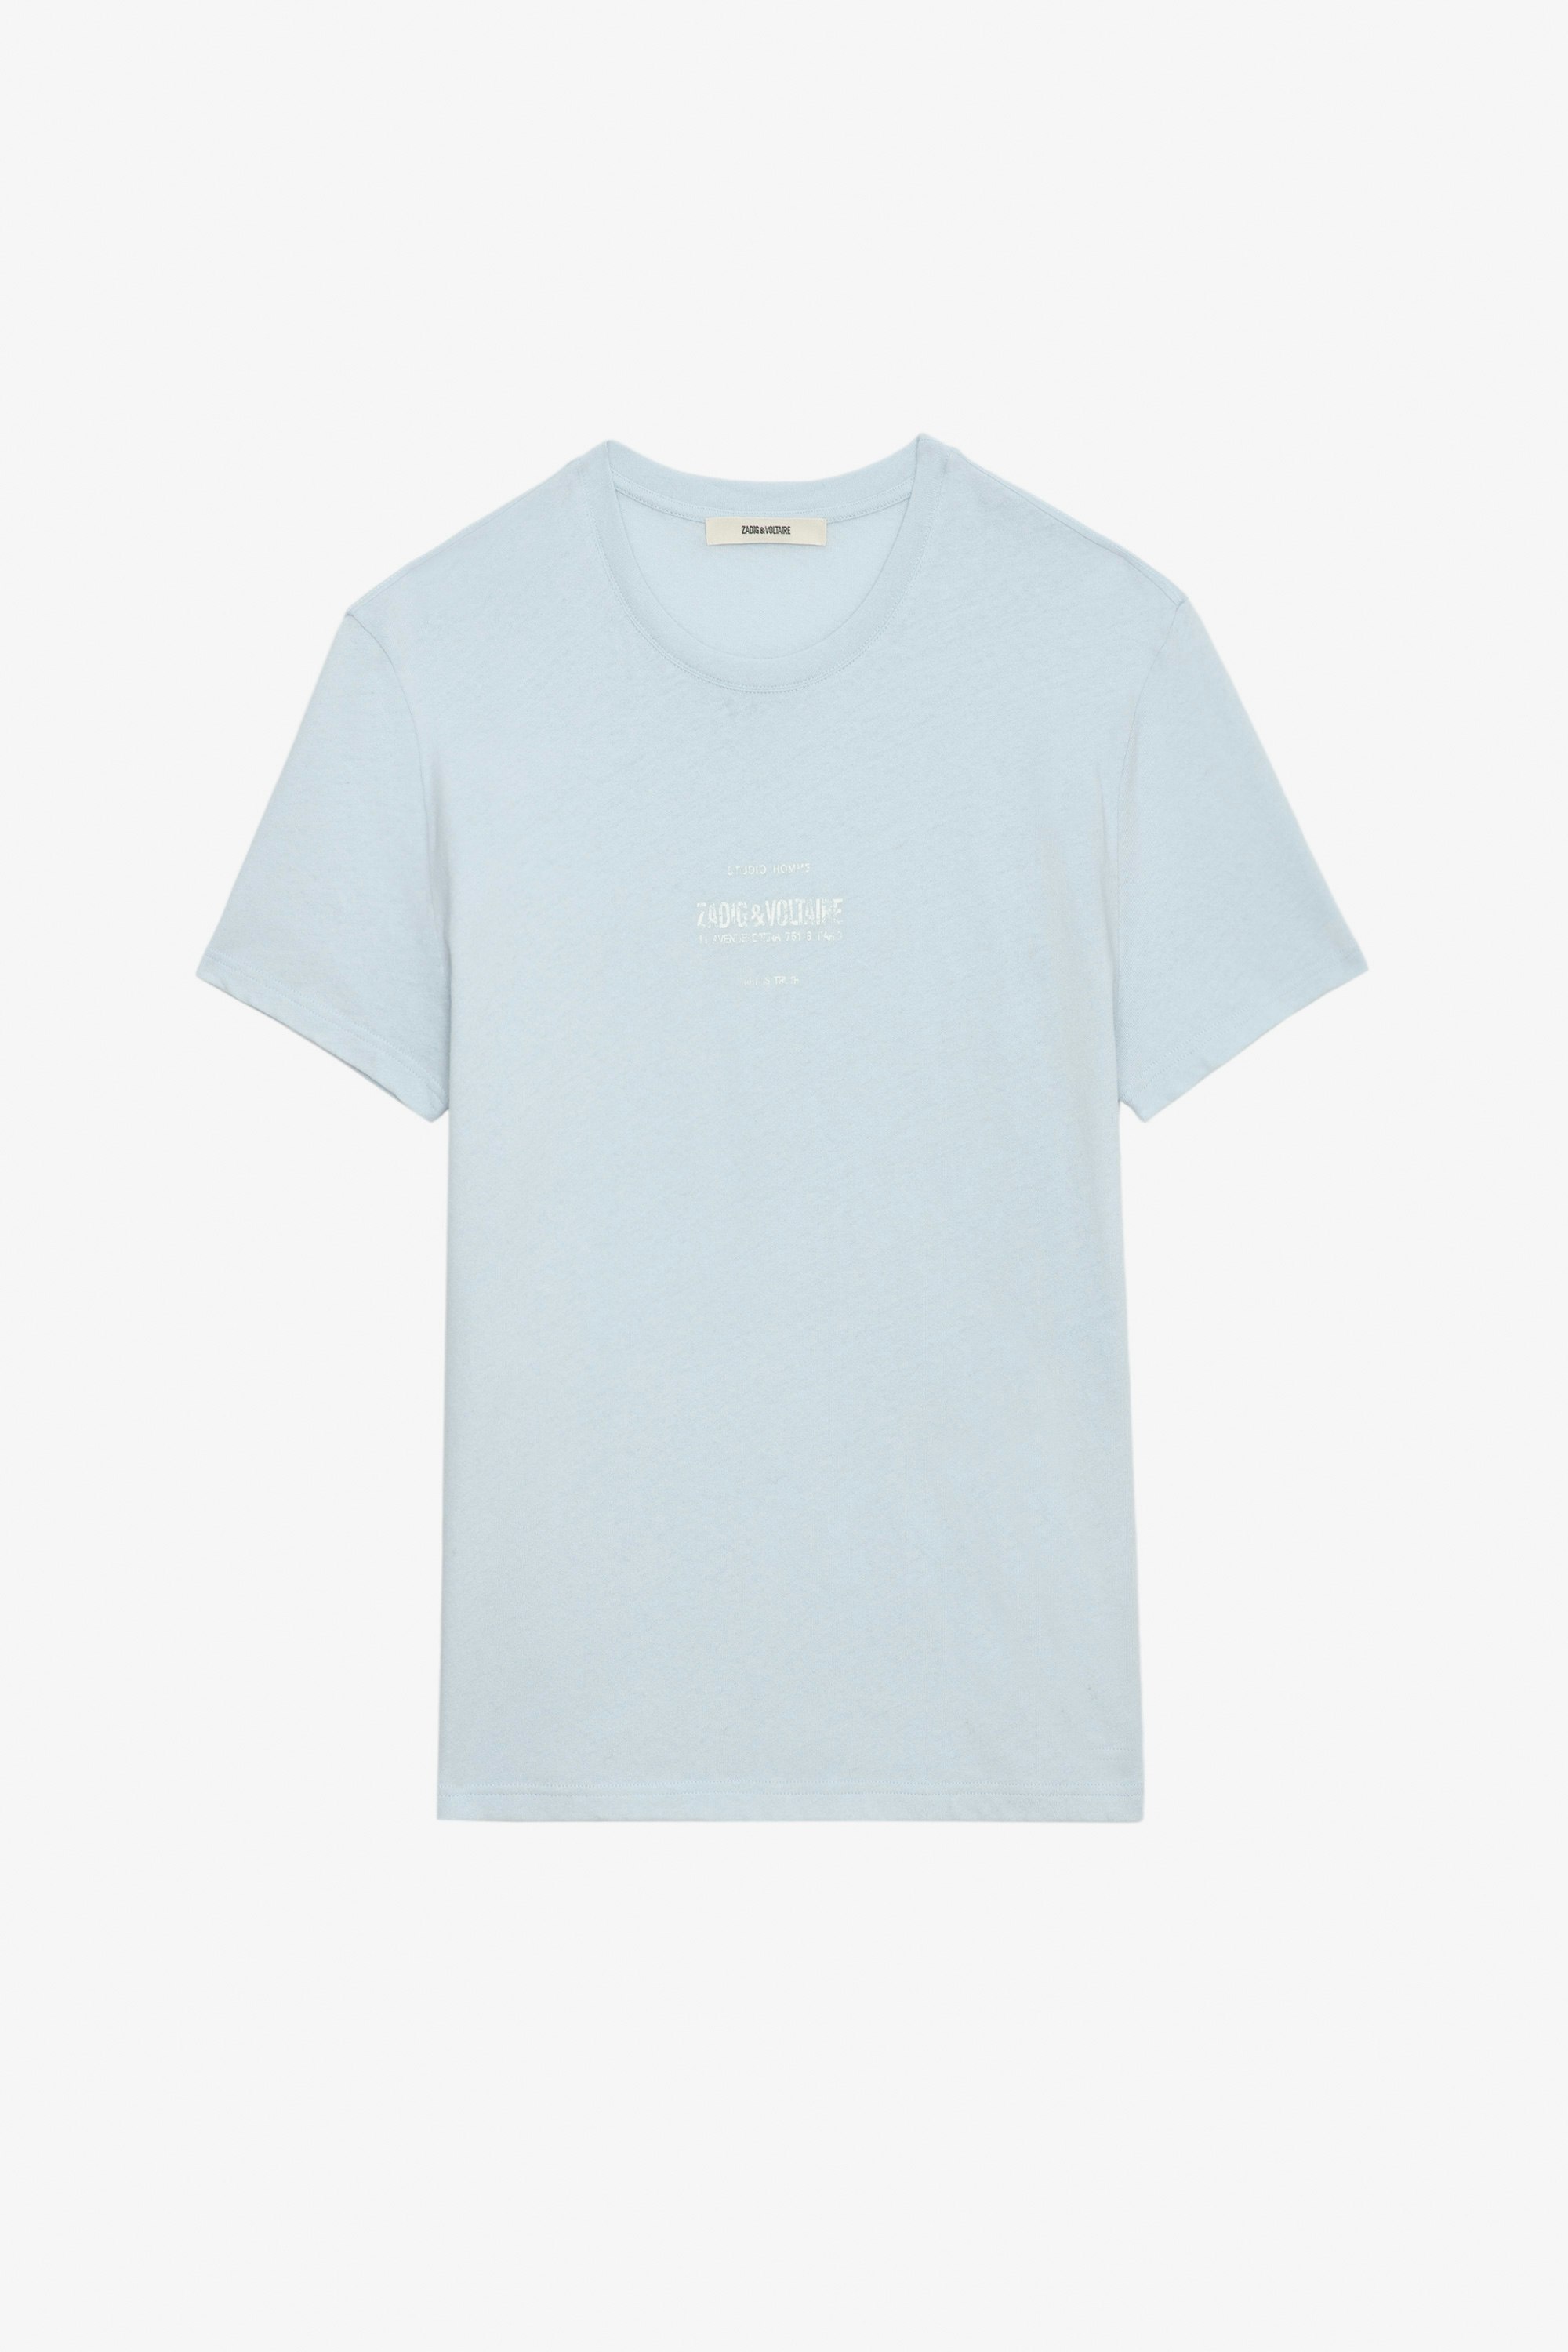 Jetty T-shirt - Sky blue washed linen short-sleeved T-shirt with printed Studio Homme insignia.